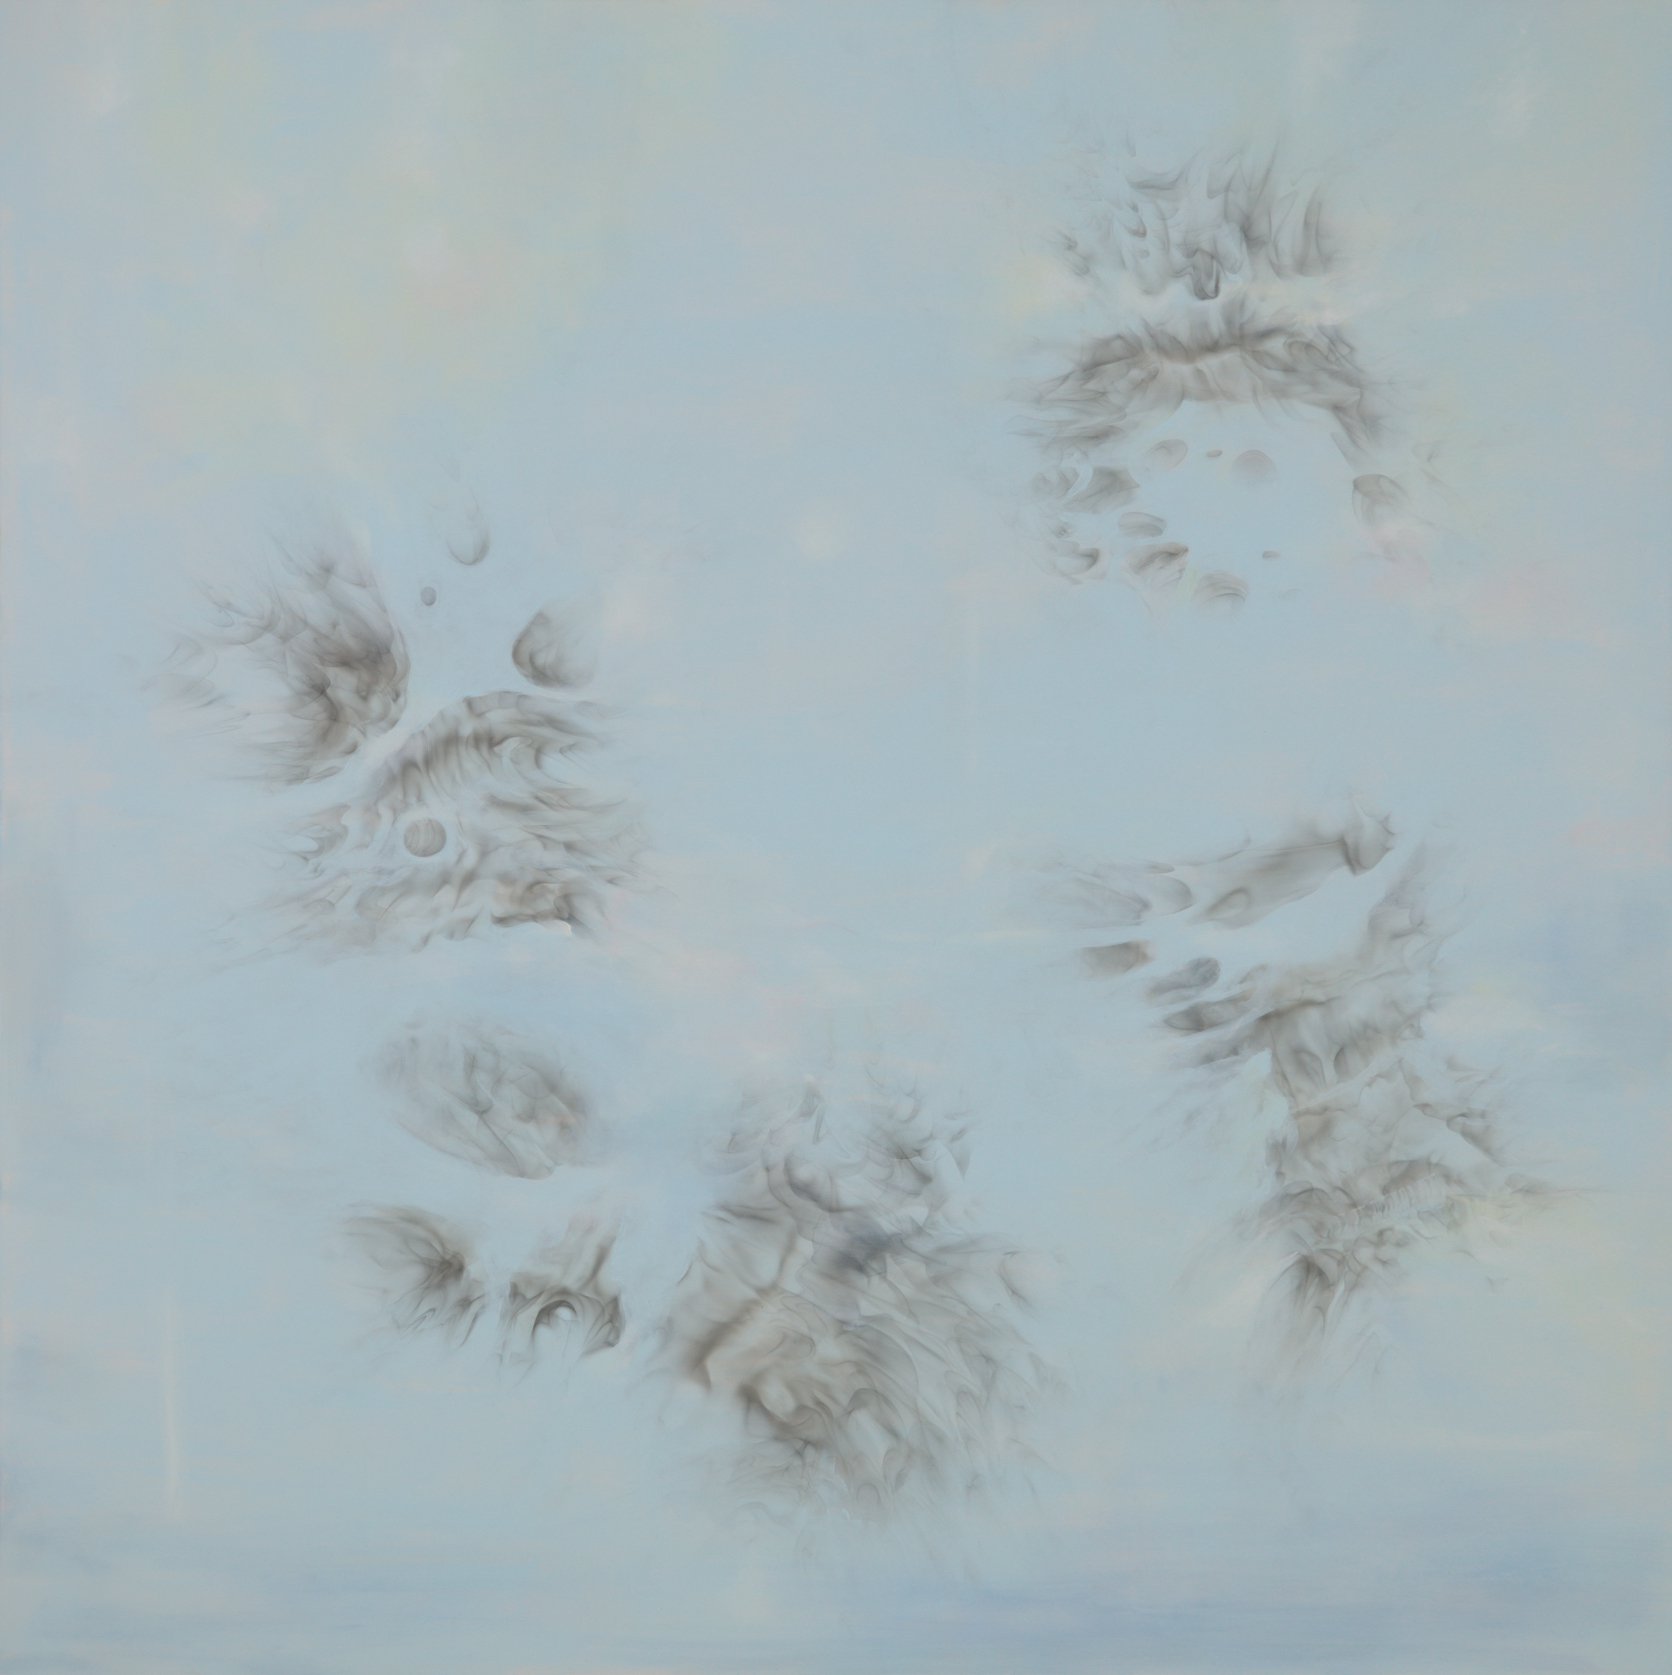 Eftihis Patsourakis, Untitled, oil, acrylic and smoke on canvas, 180 x 200 x 4 cm (70 7/8 x 78 3/4 x 1 5/8 in), 2022